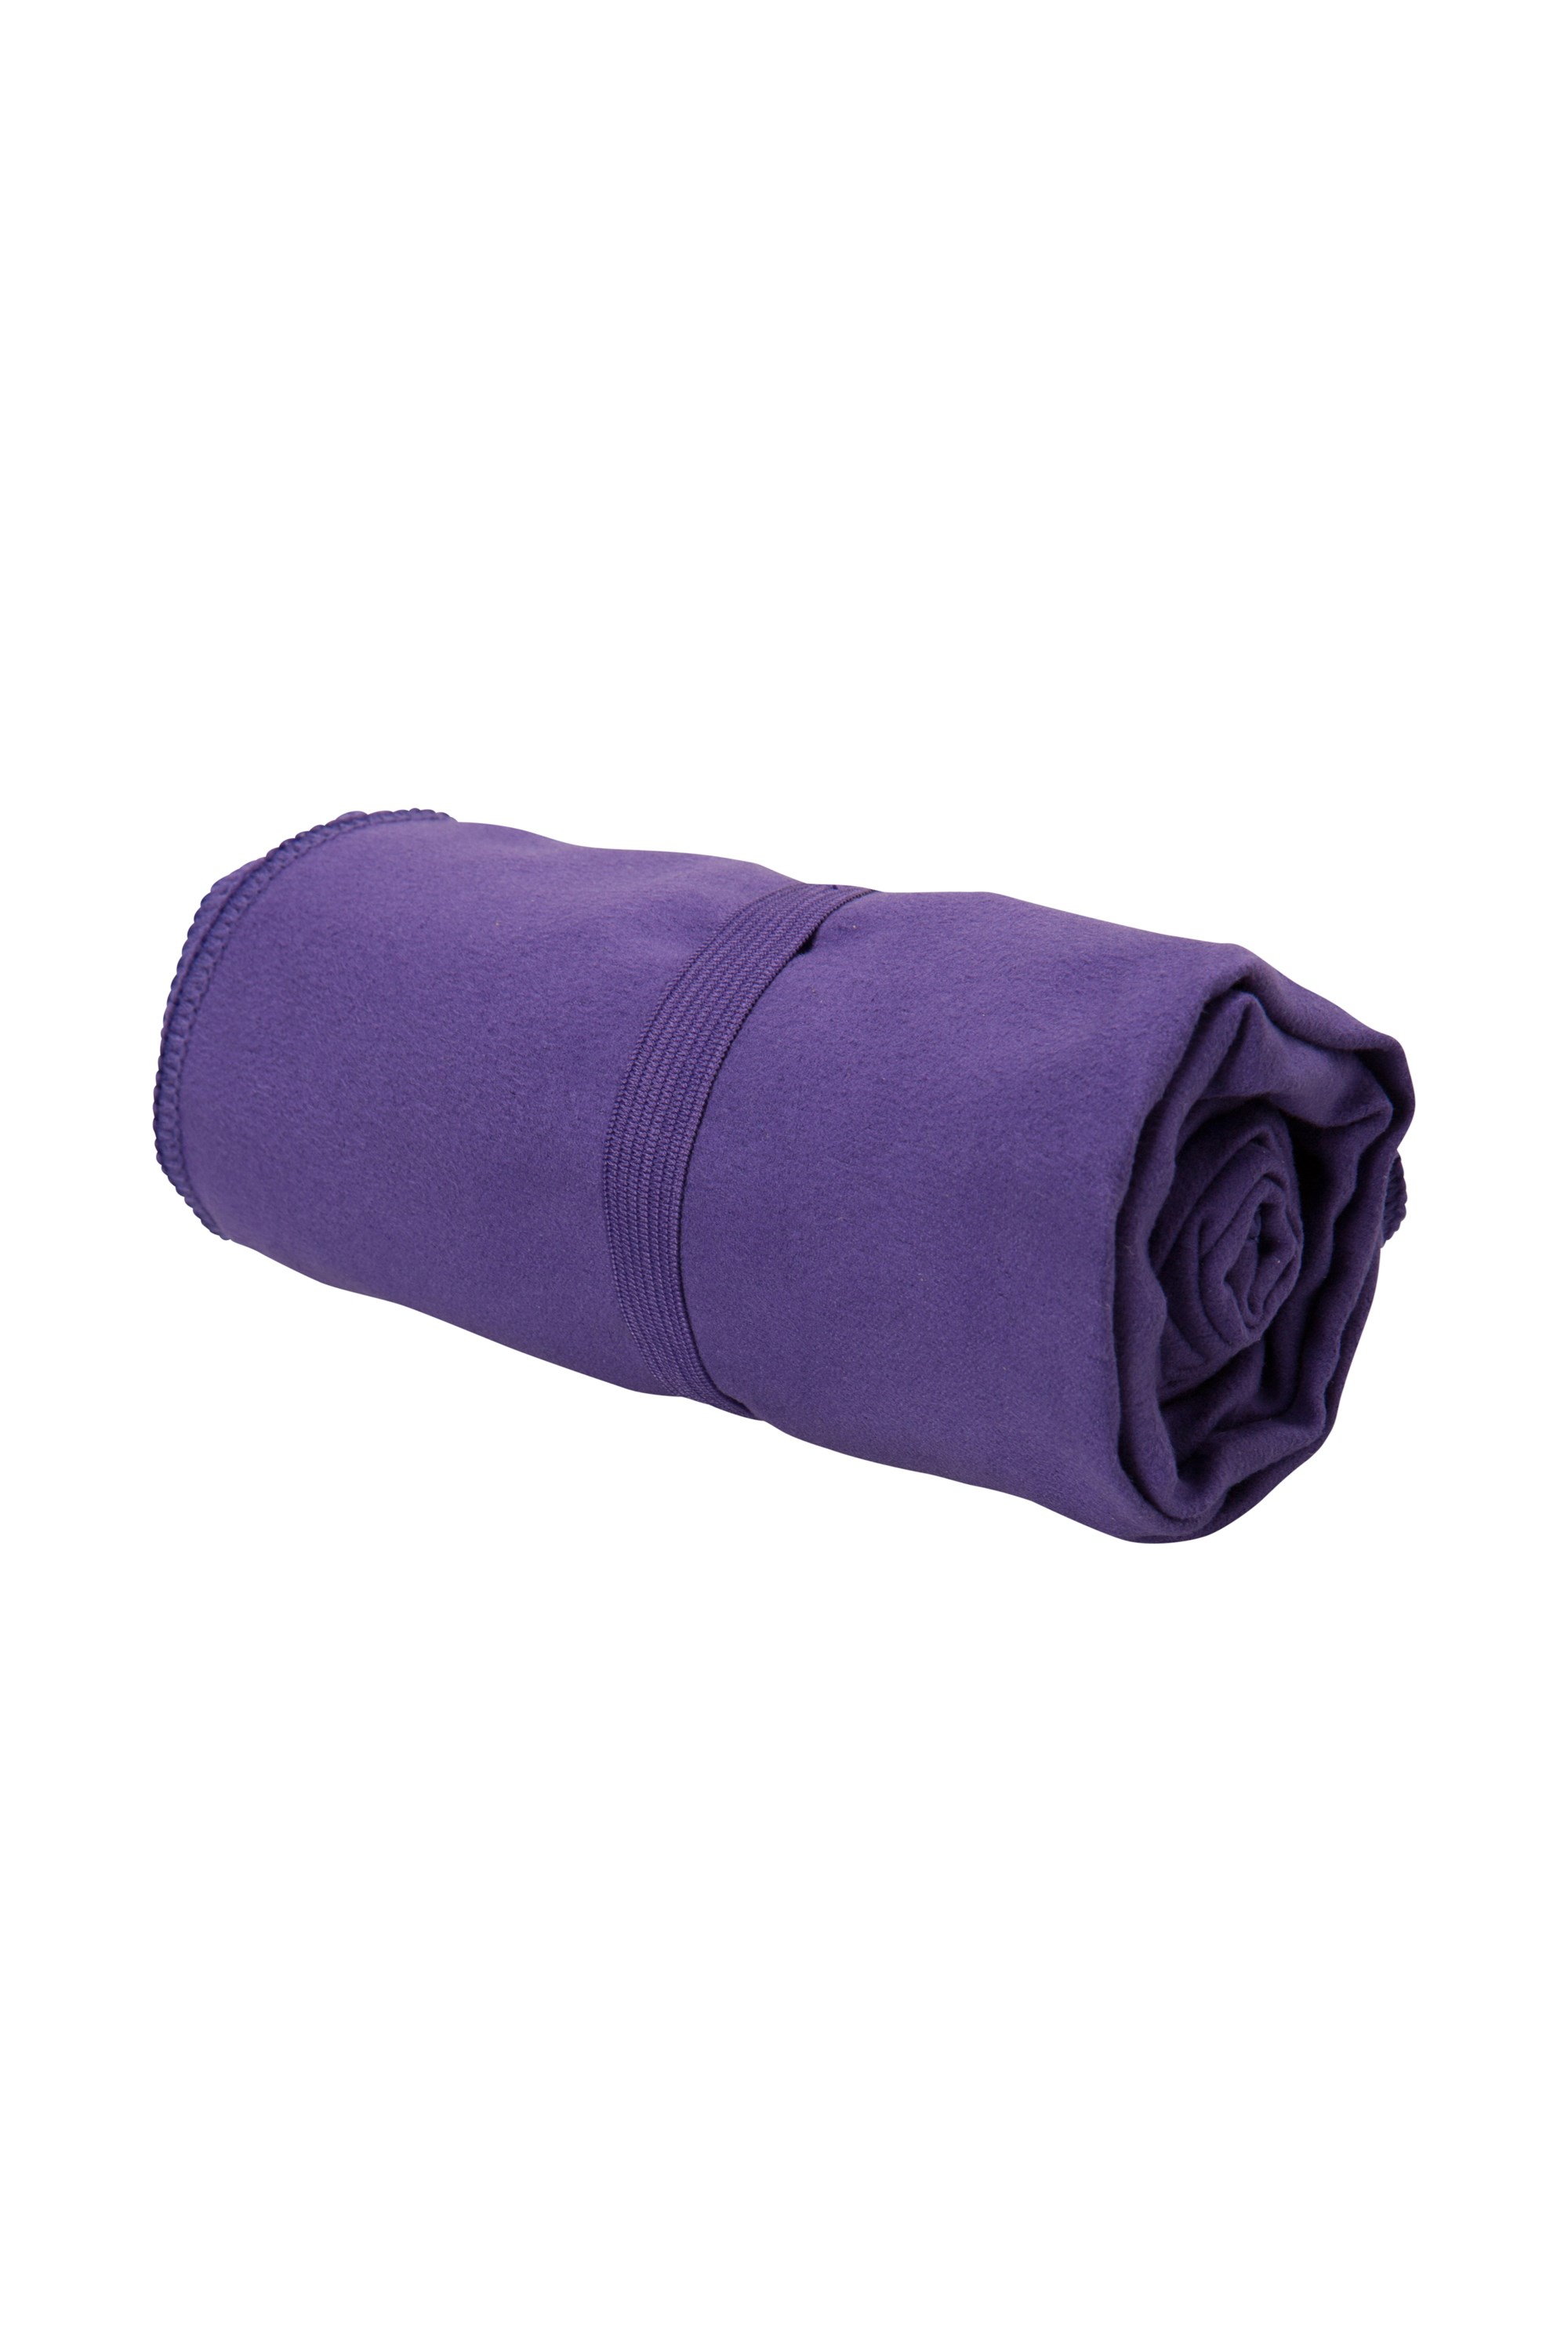 120 x 58cm Mountain Warehouse Compact Travel Towel Quick Drying Perfect